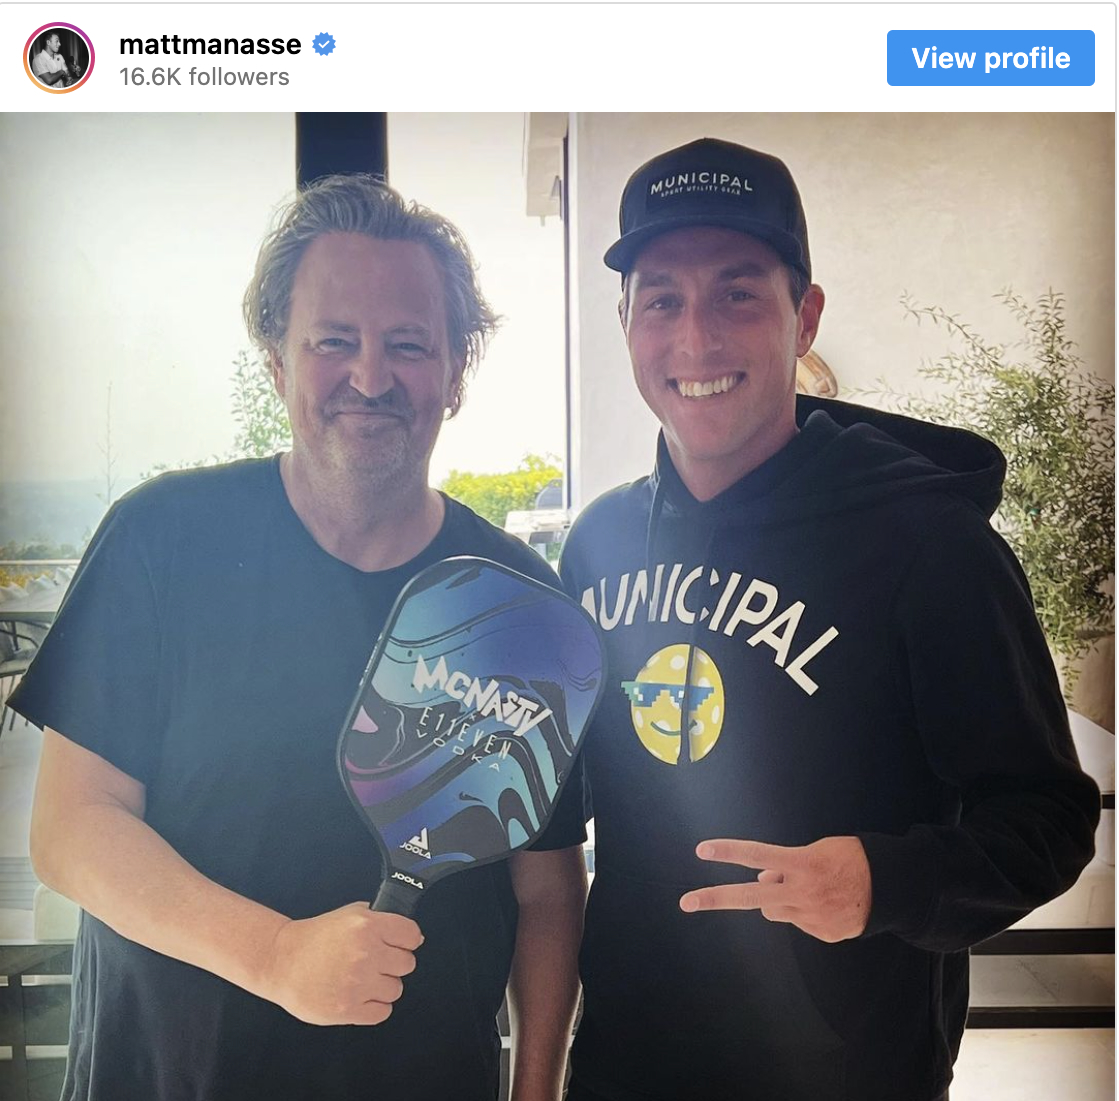 @dateline_keith @MatthewPerry the last place @MatthewPerry was seen before 'drowning' in his hot tub, was playing pickleball. here is a photo of him with his 'coach' #matthewanasse with him flashing dueces and wearing a #sfk hoodie. curious who has invested in #pickleball and their connections to #rappers and…